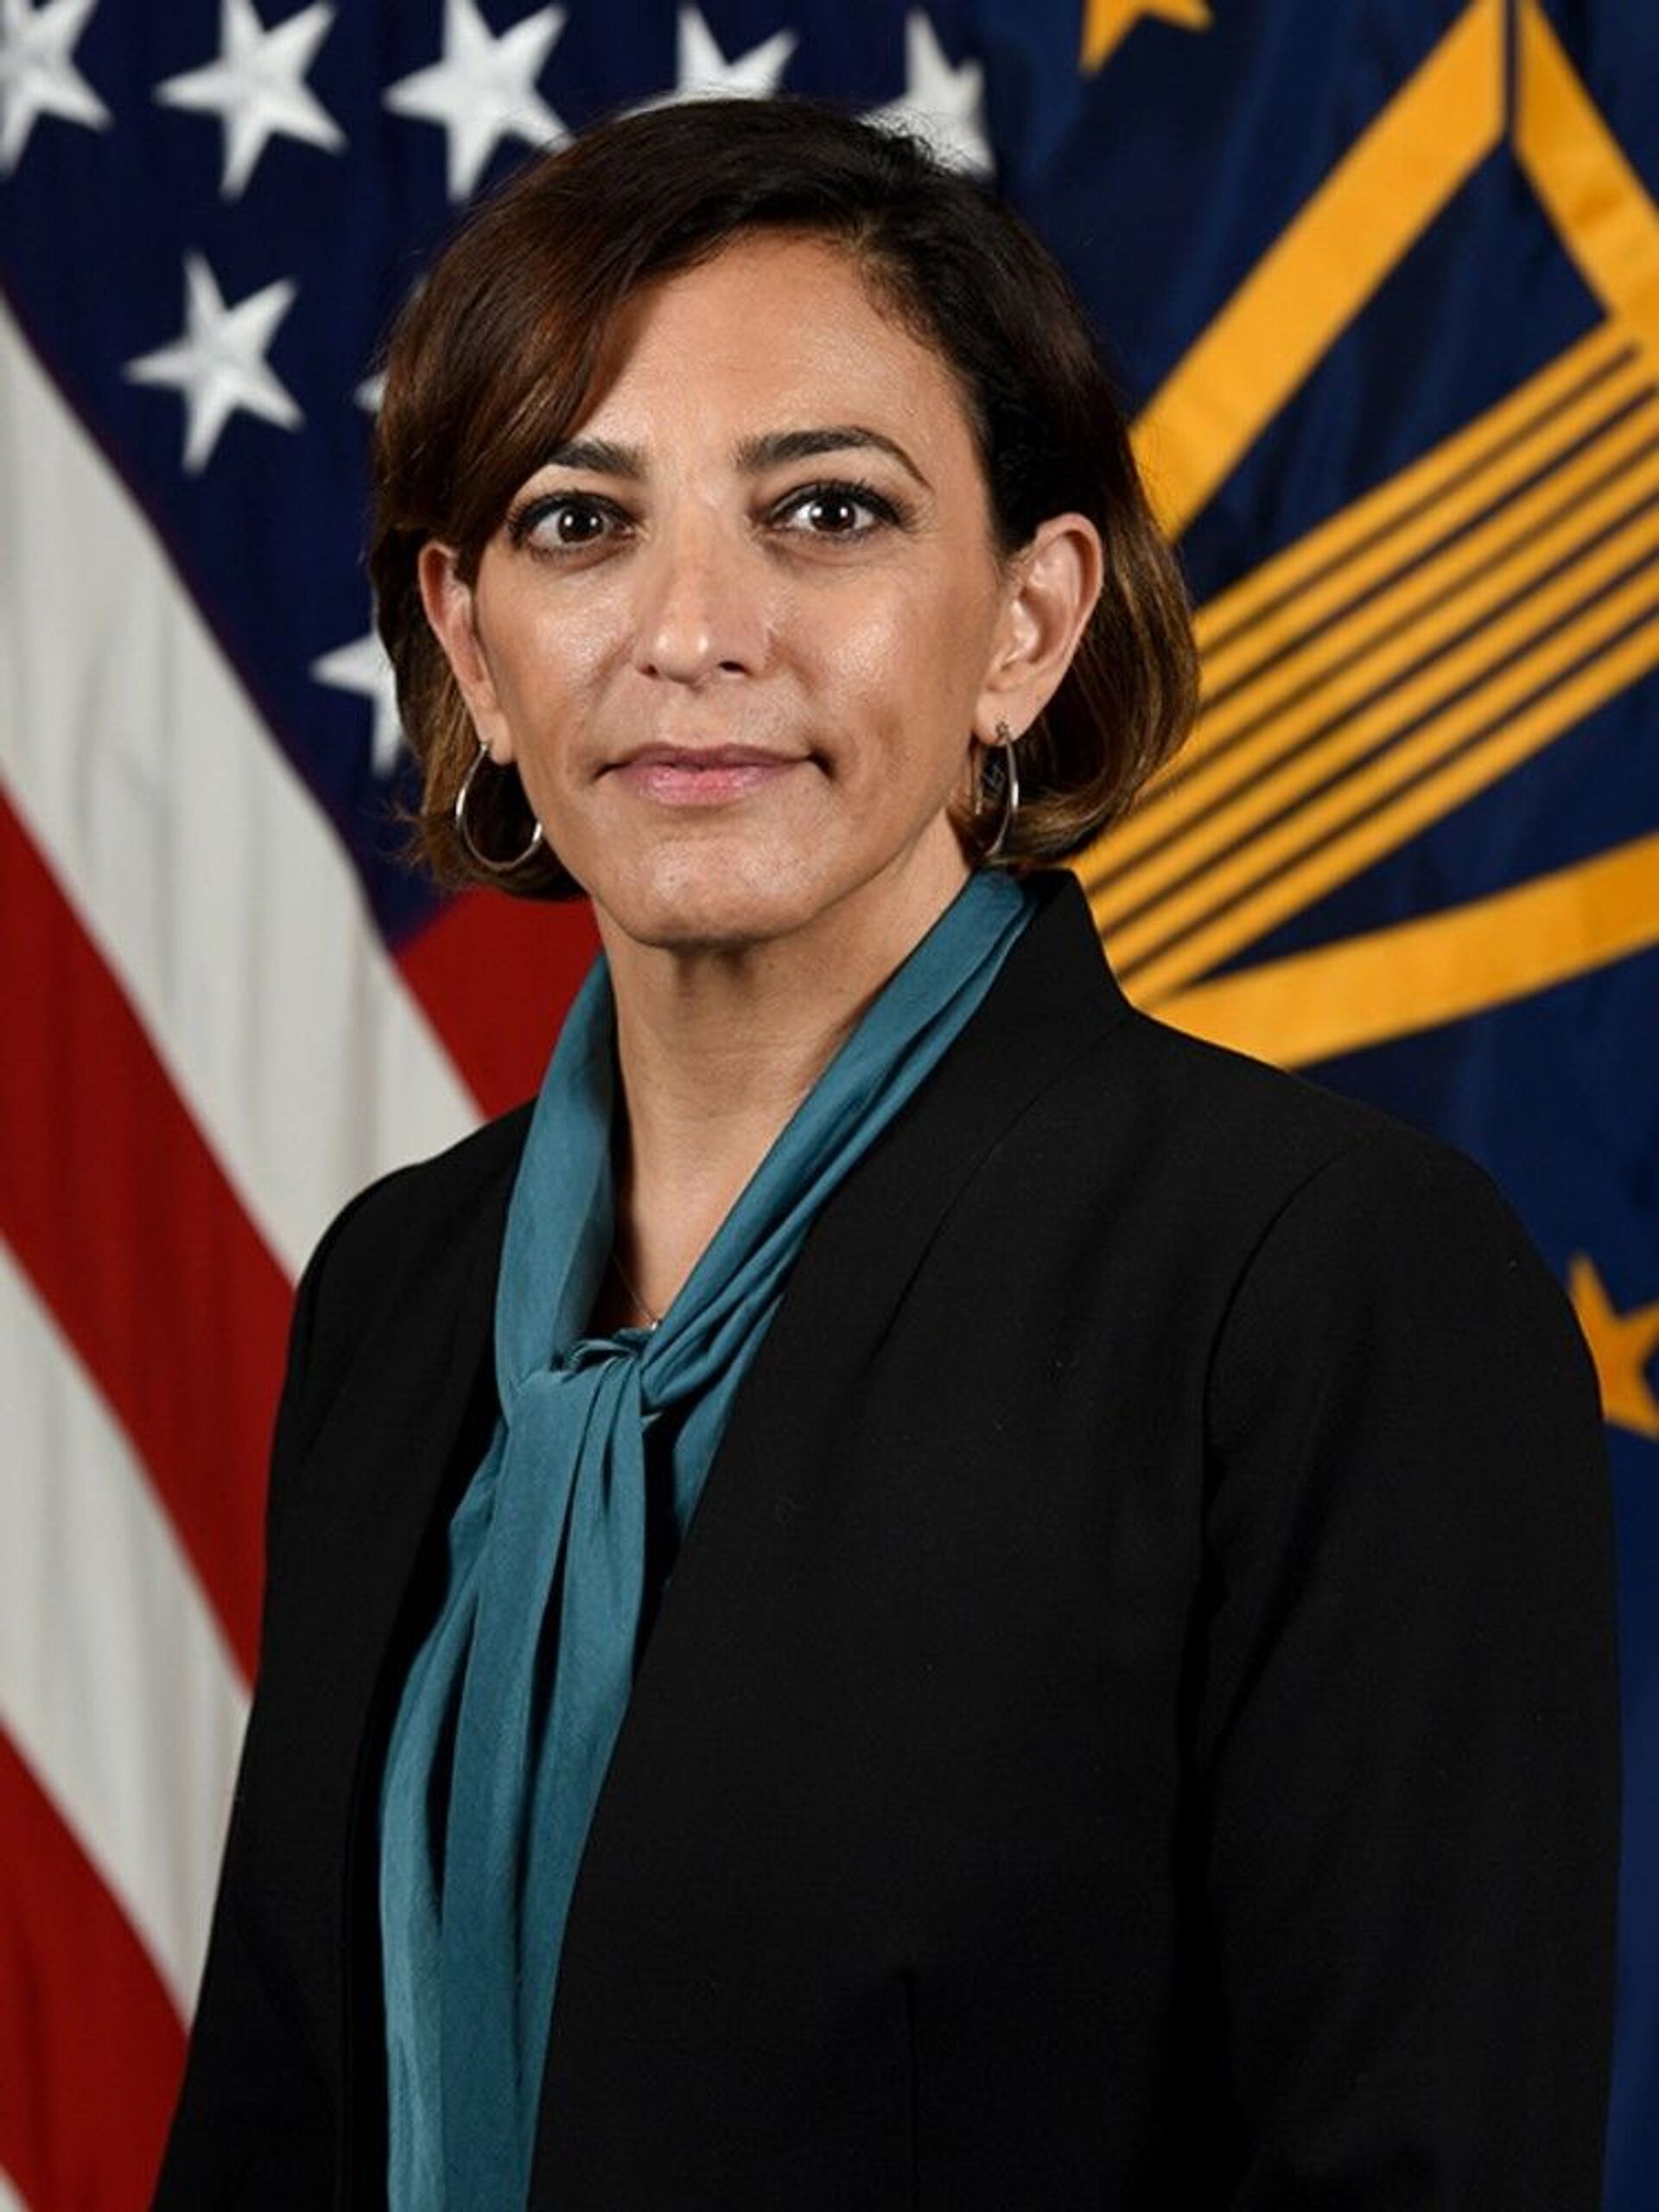 Image provided by the Office of the Under Secretary of Defense shows Katie Arrington, a chief information security officer with the Pentagon's acquisition and sustainment office. Reports recently detailed that Arrington has been placed on administrative leave over a suspected disclosure of classified information. - Sputnik International, 1920, 07.09.2021